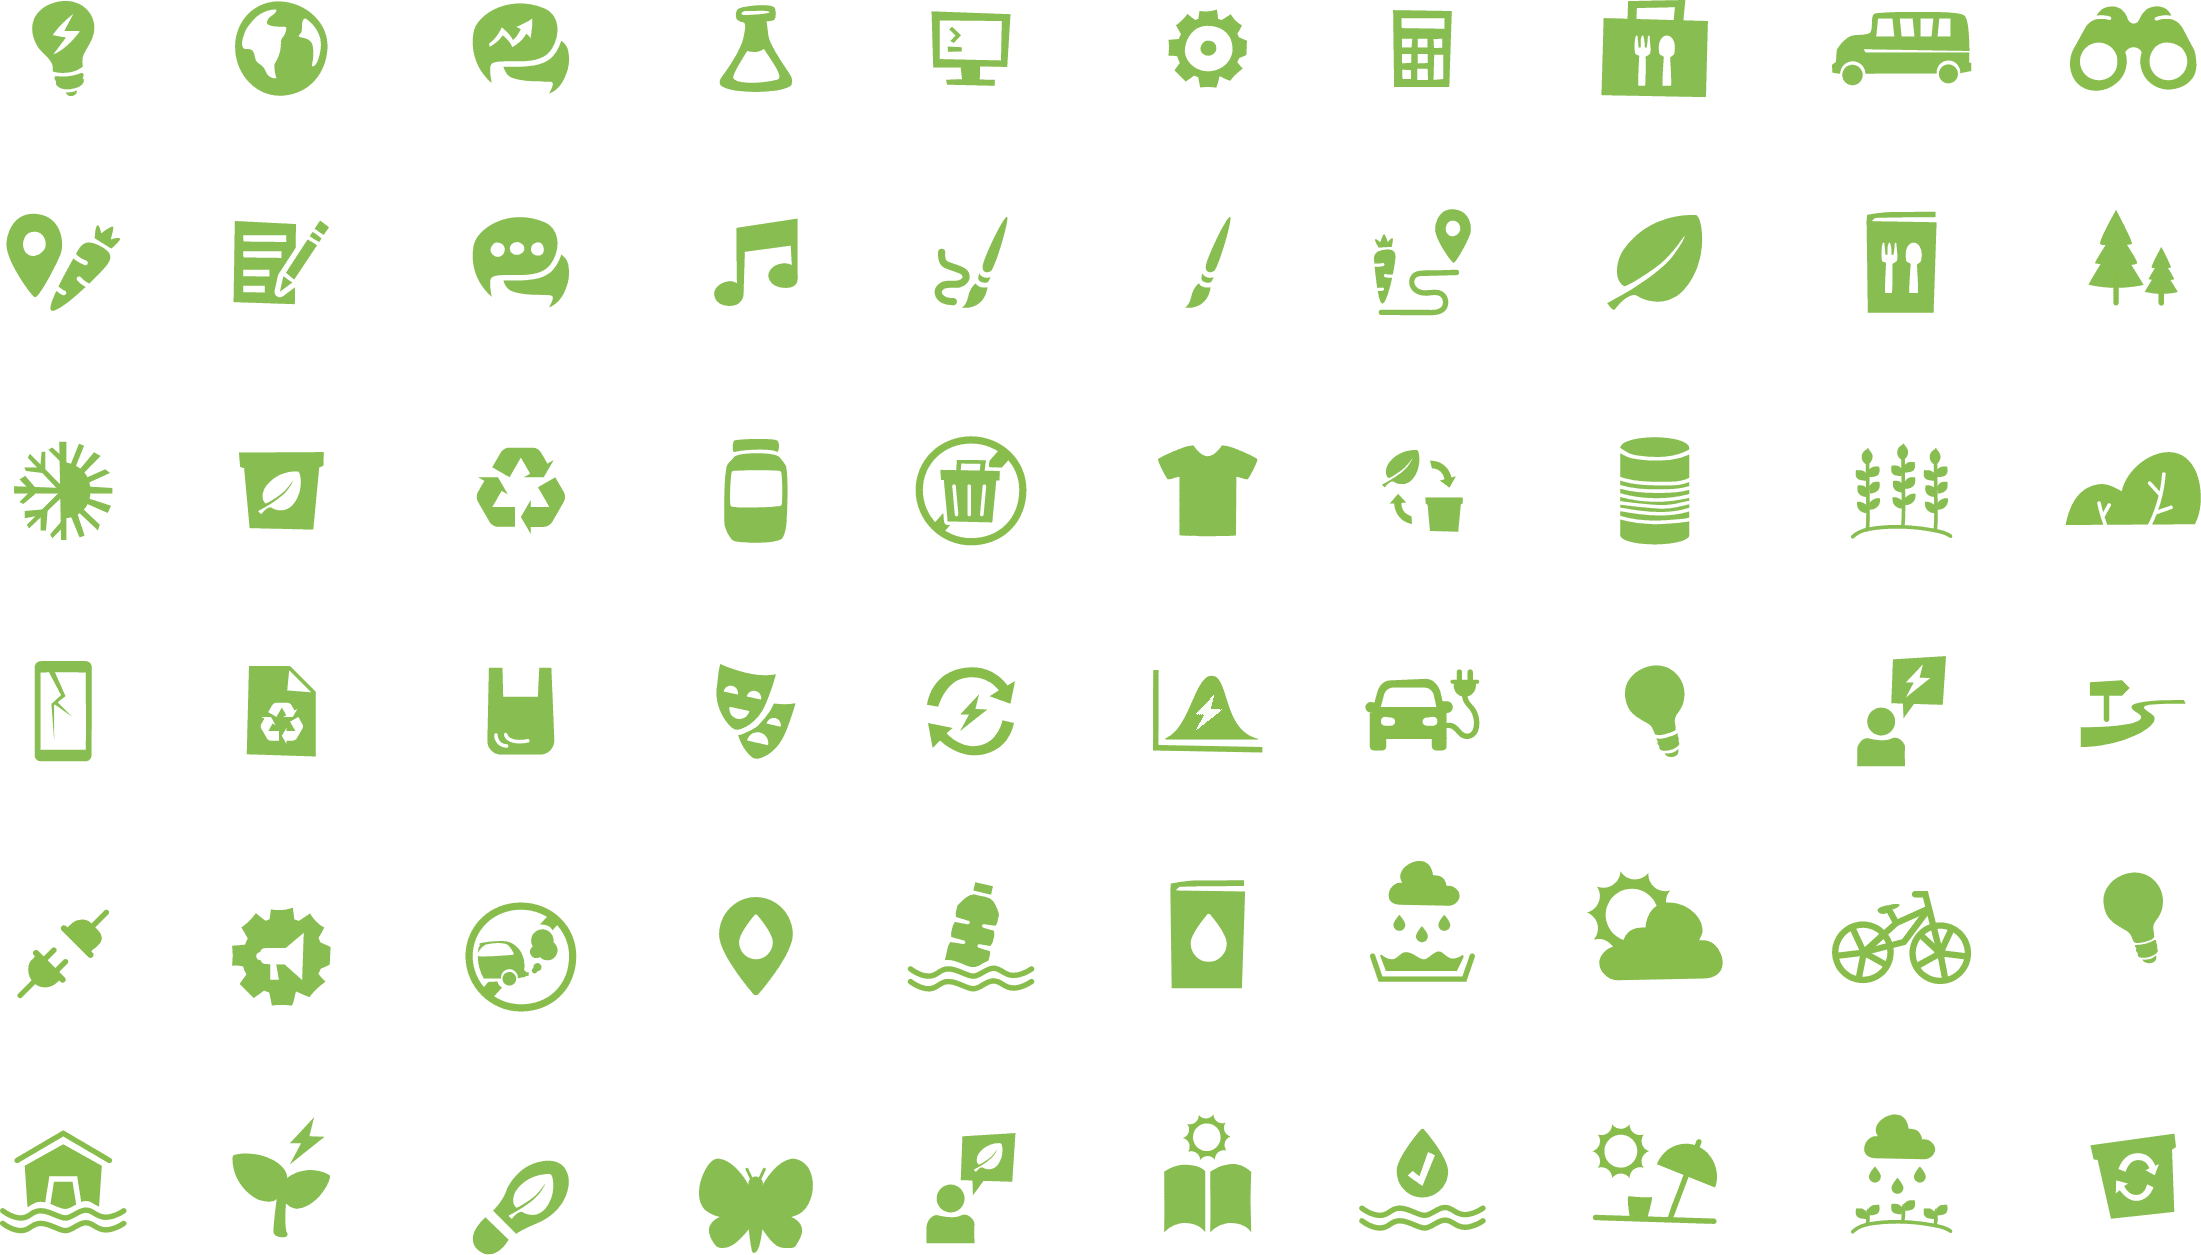 The Gaia Project icons